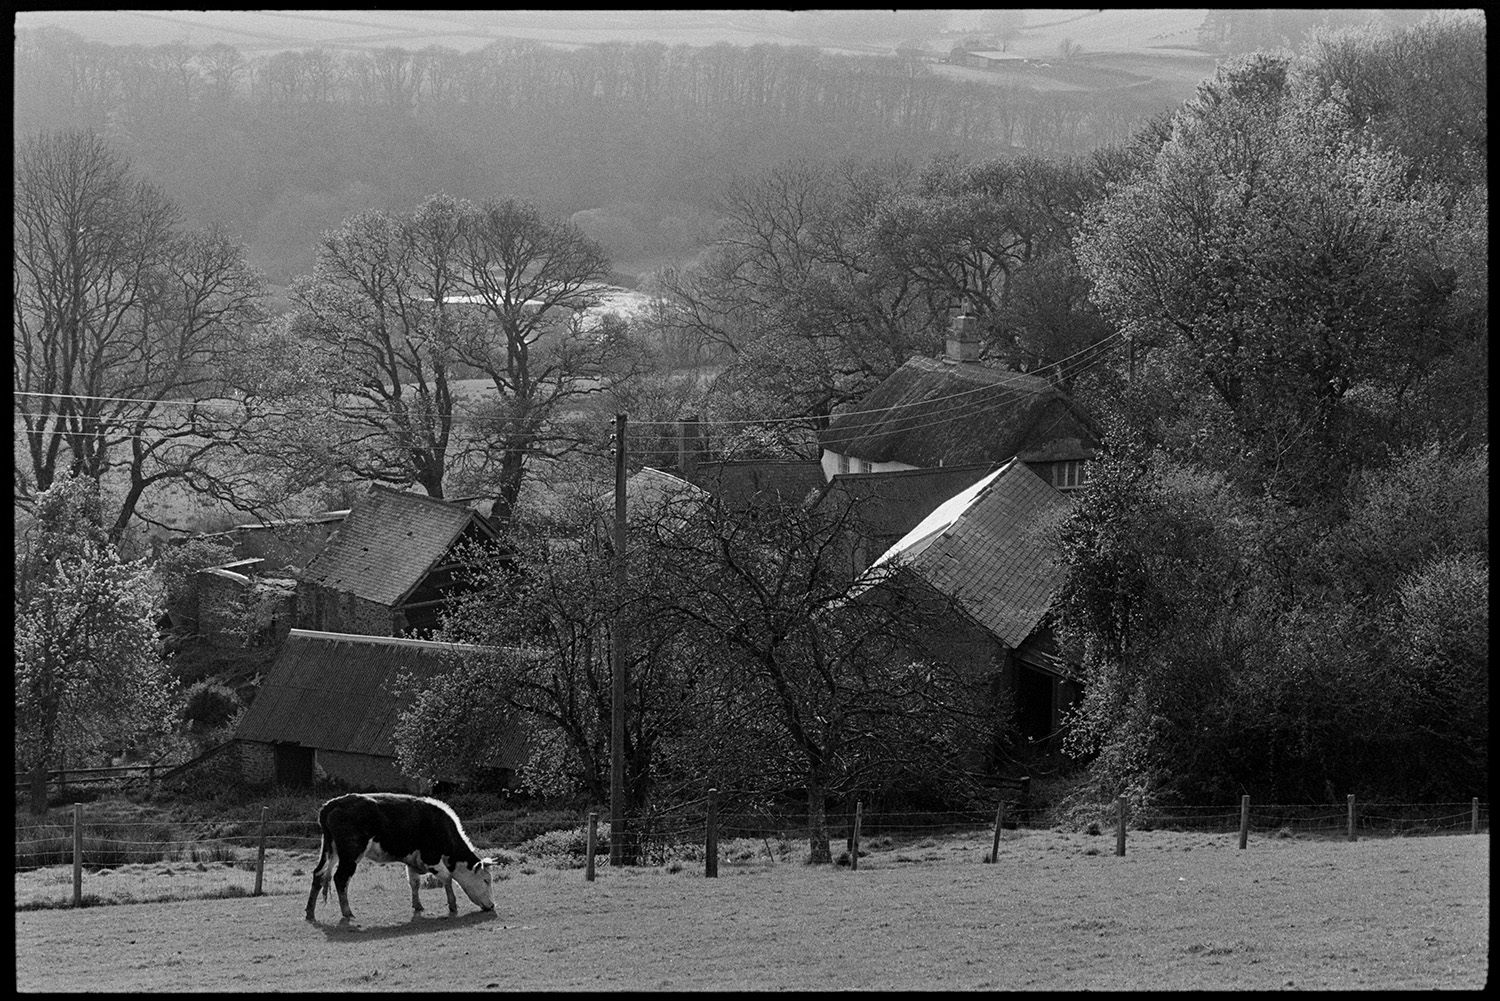 Cattle grazing in front of thatched farmhouse amongst trees. 
[A cow grazing in a field in front of a thatched farmhouse and barns at Ashwell, Dolton. The farmyard is surrounded by trees.]